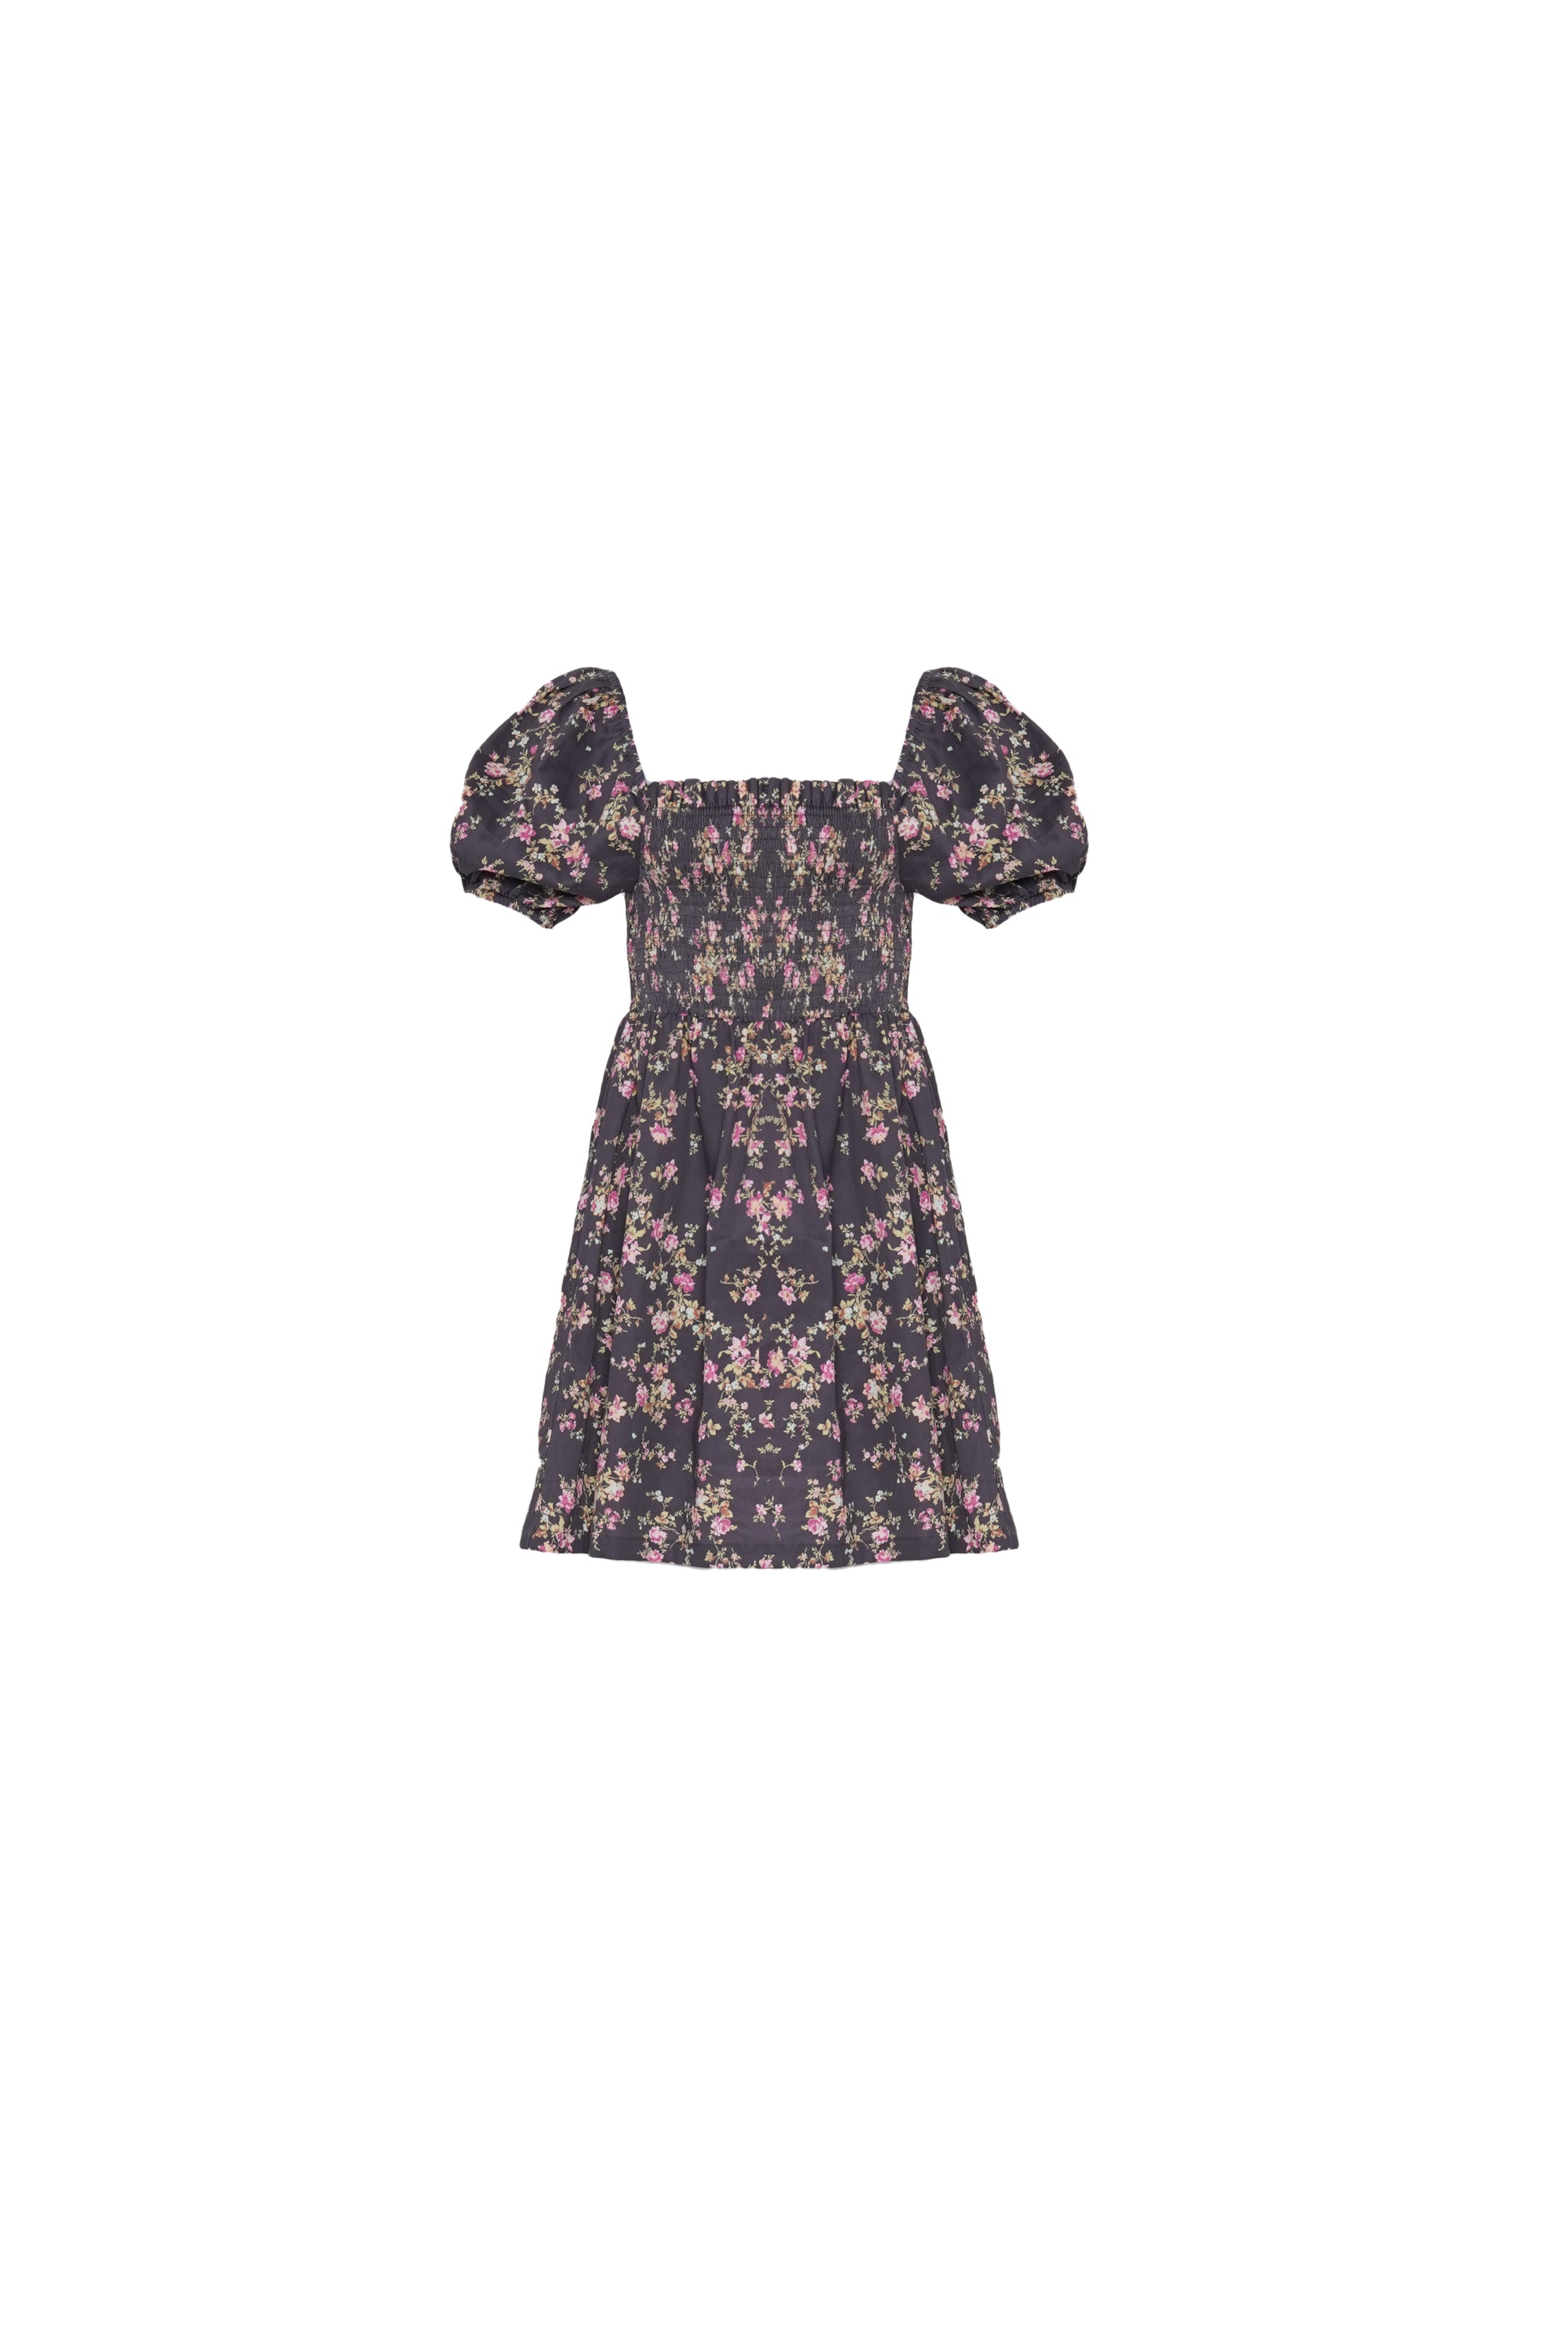 Front image of a floral print summer dress